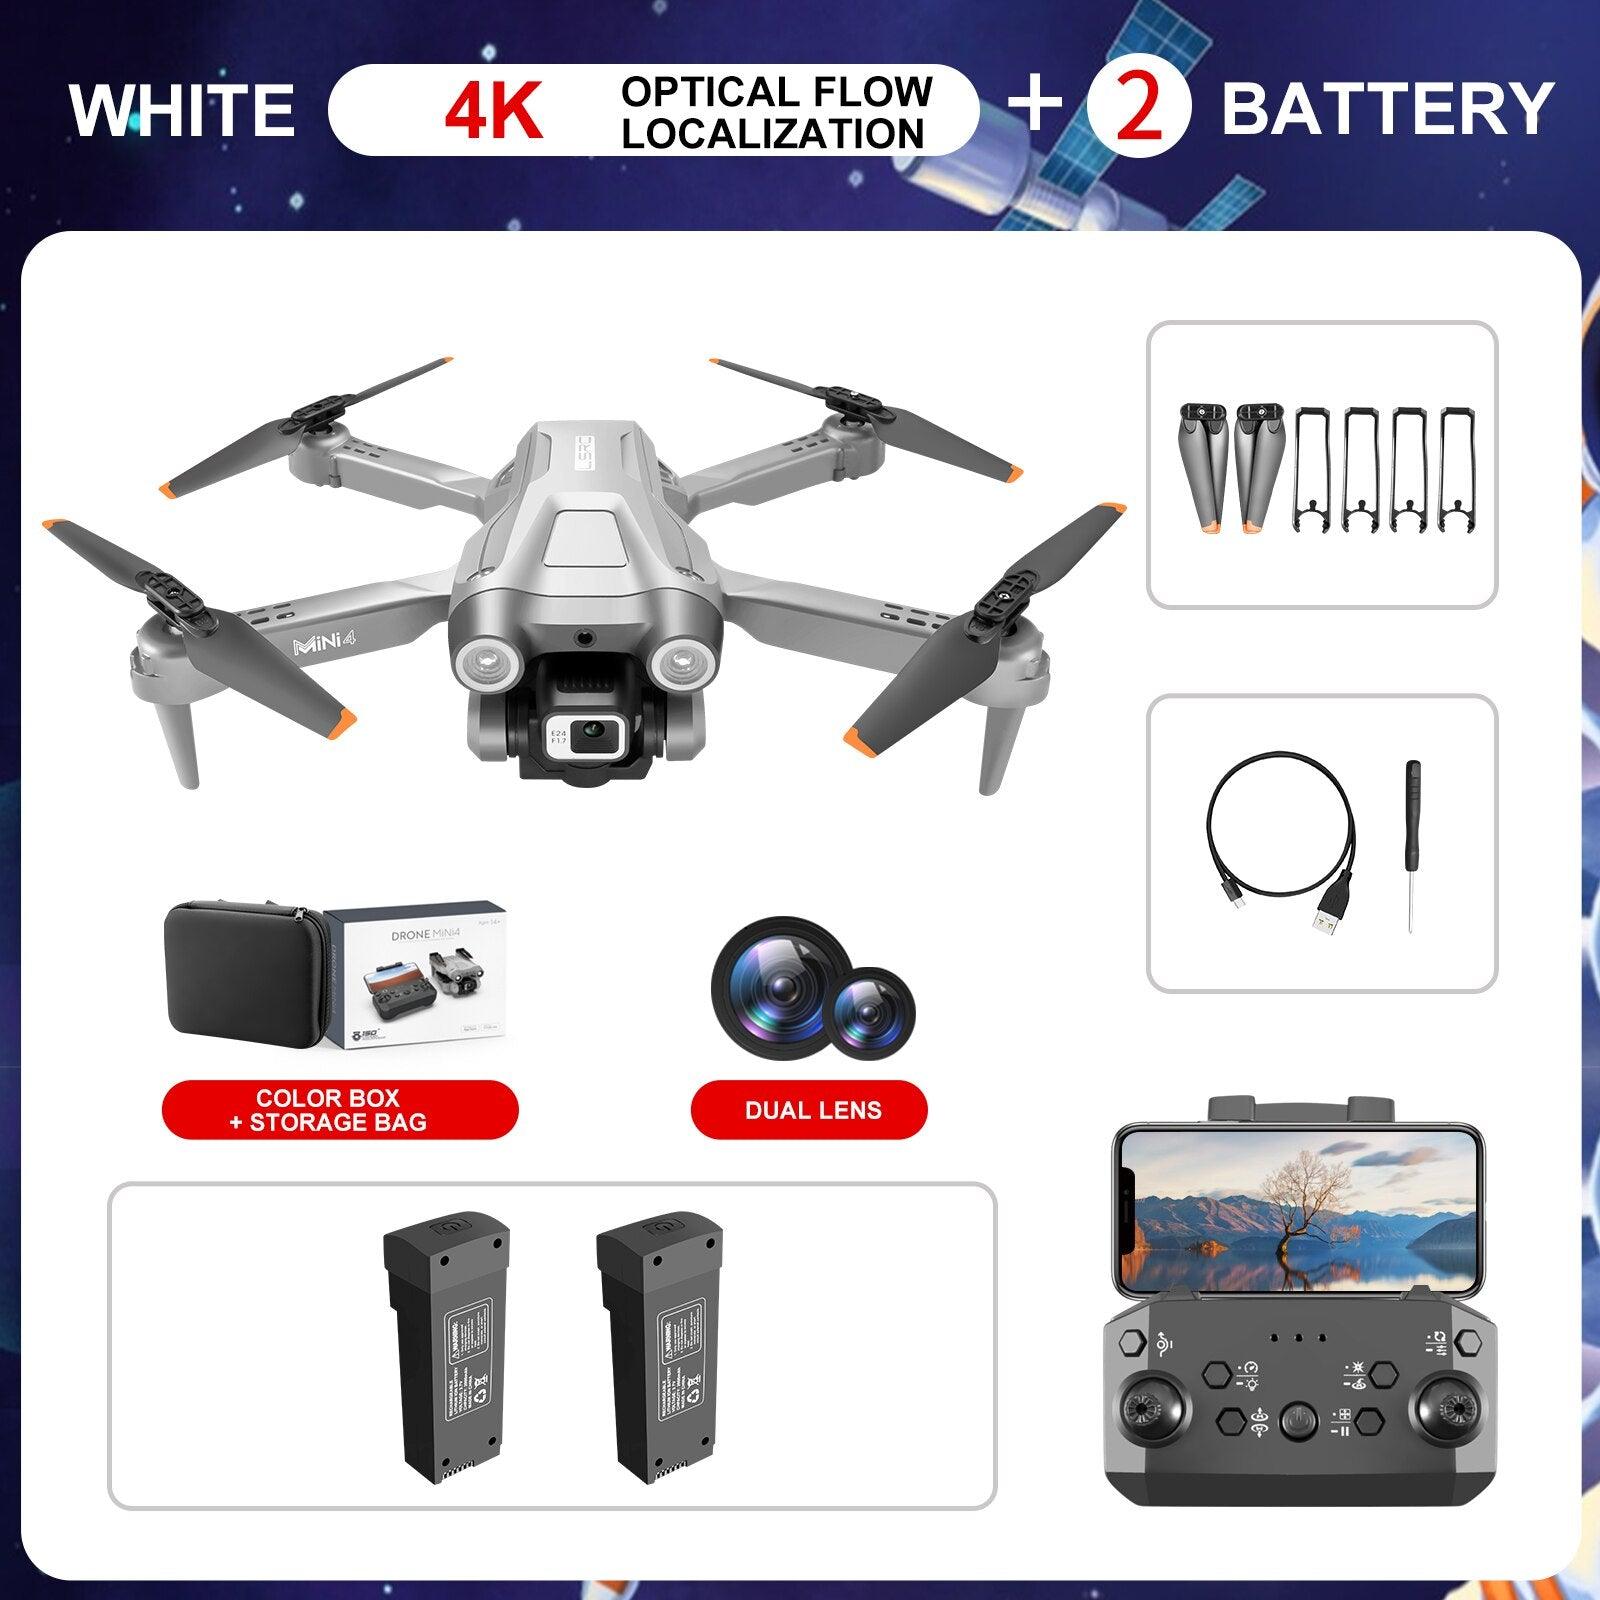 KBDFA MINI4 Drone - 4K HD Camera Z908 Dron Remote Control Drones RC Helicopters Gift 2.4G WIFi Obstacle Avoidance Quadcopter Toys - RCDrone